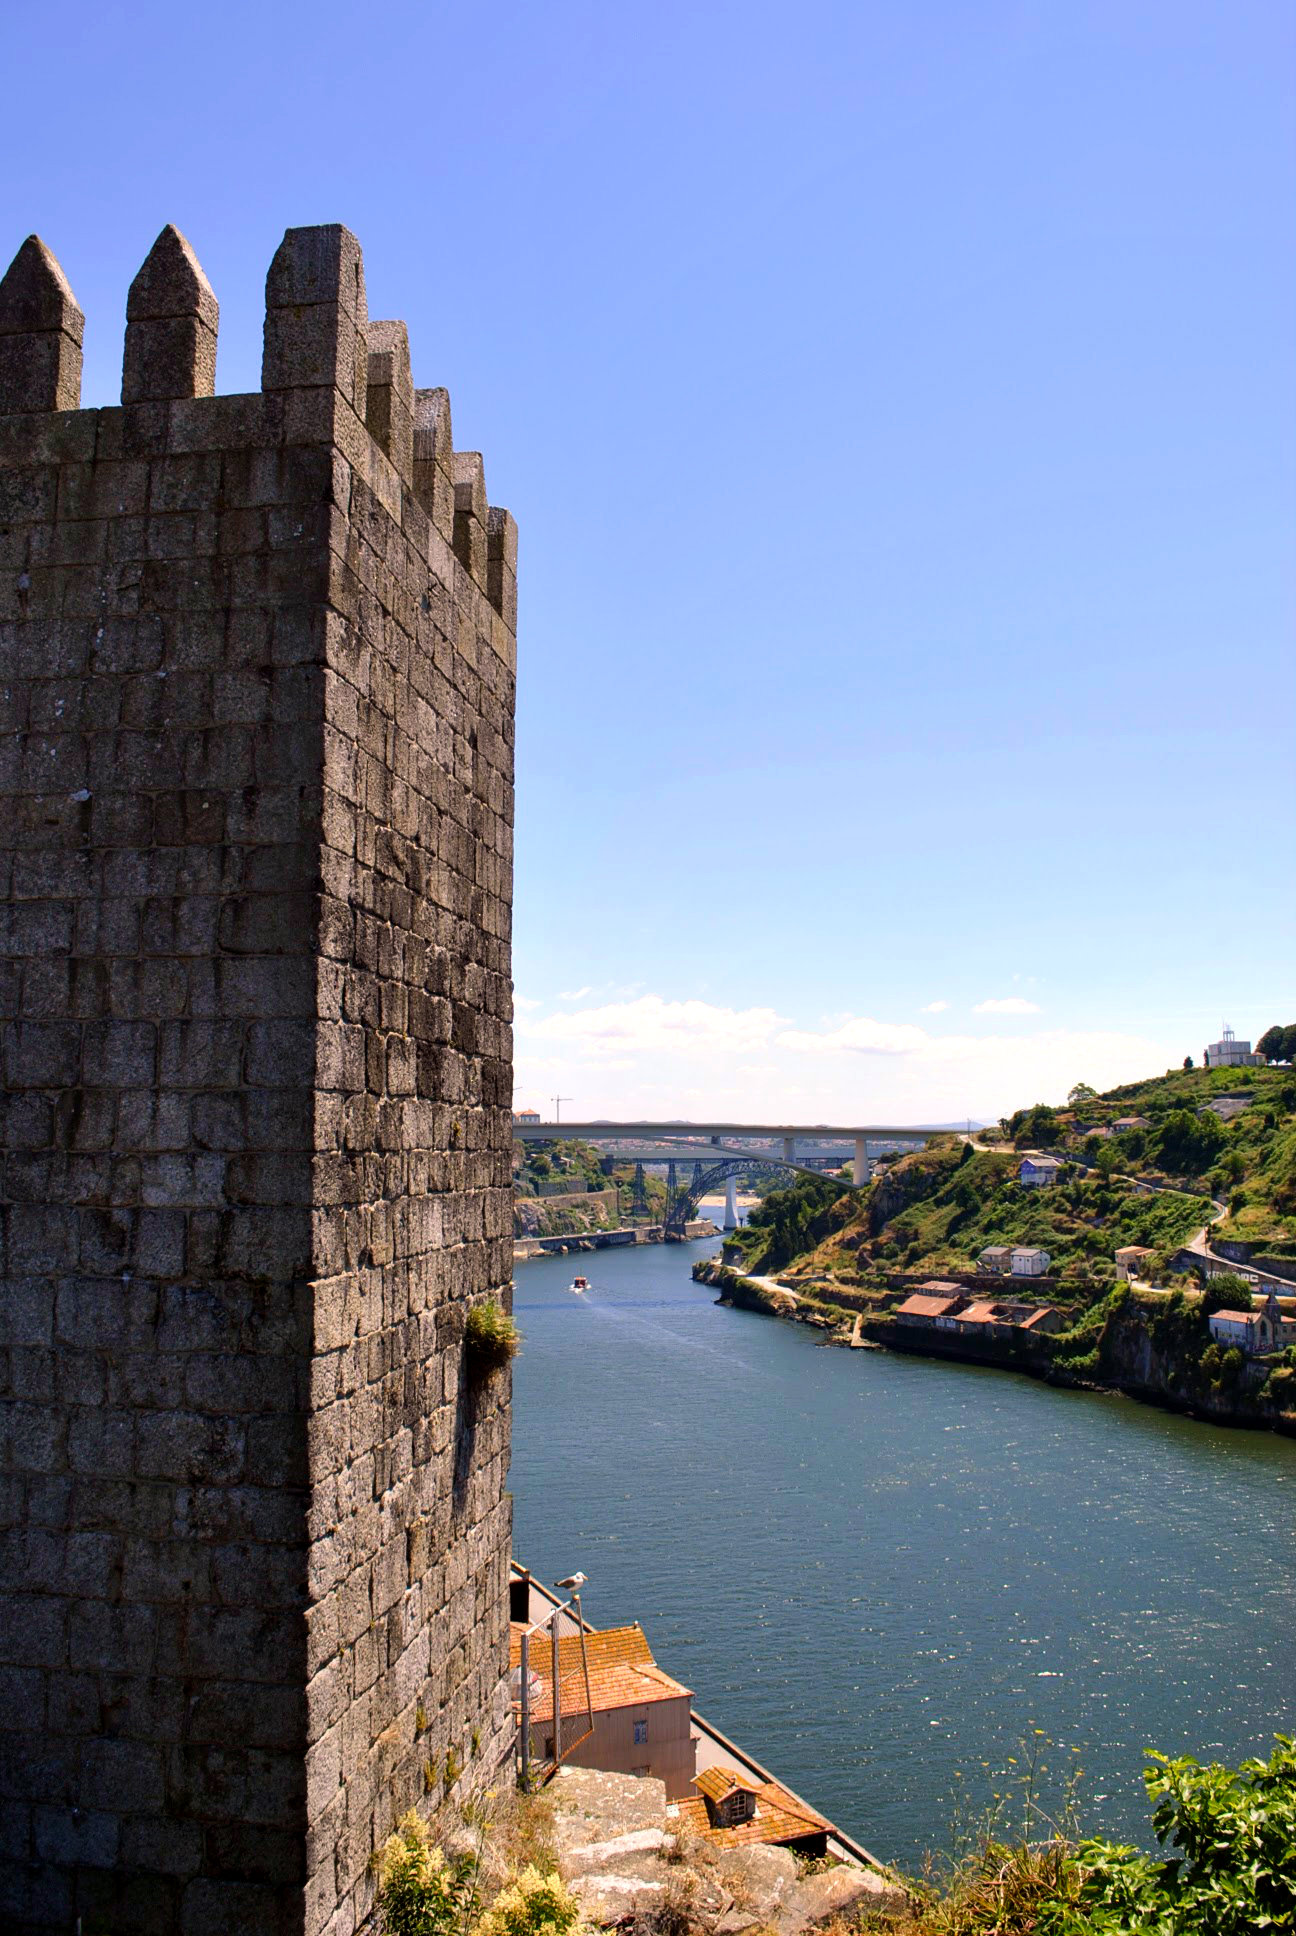 Dona Maria Bridge in Porto, built by Eiffel himself. A view from the Fernandine-Walls.